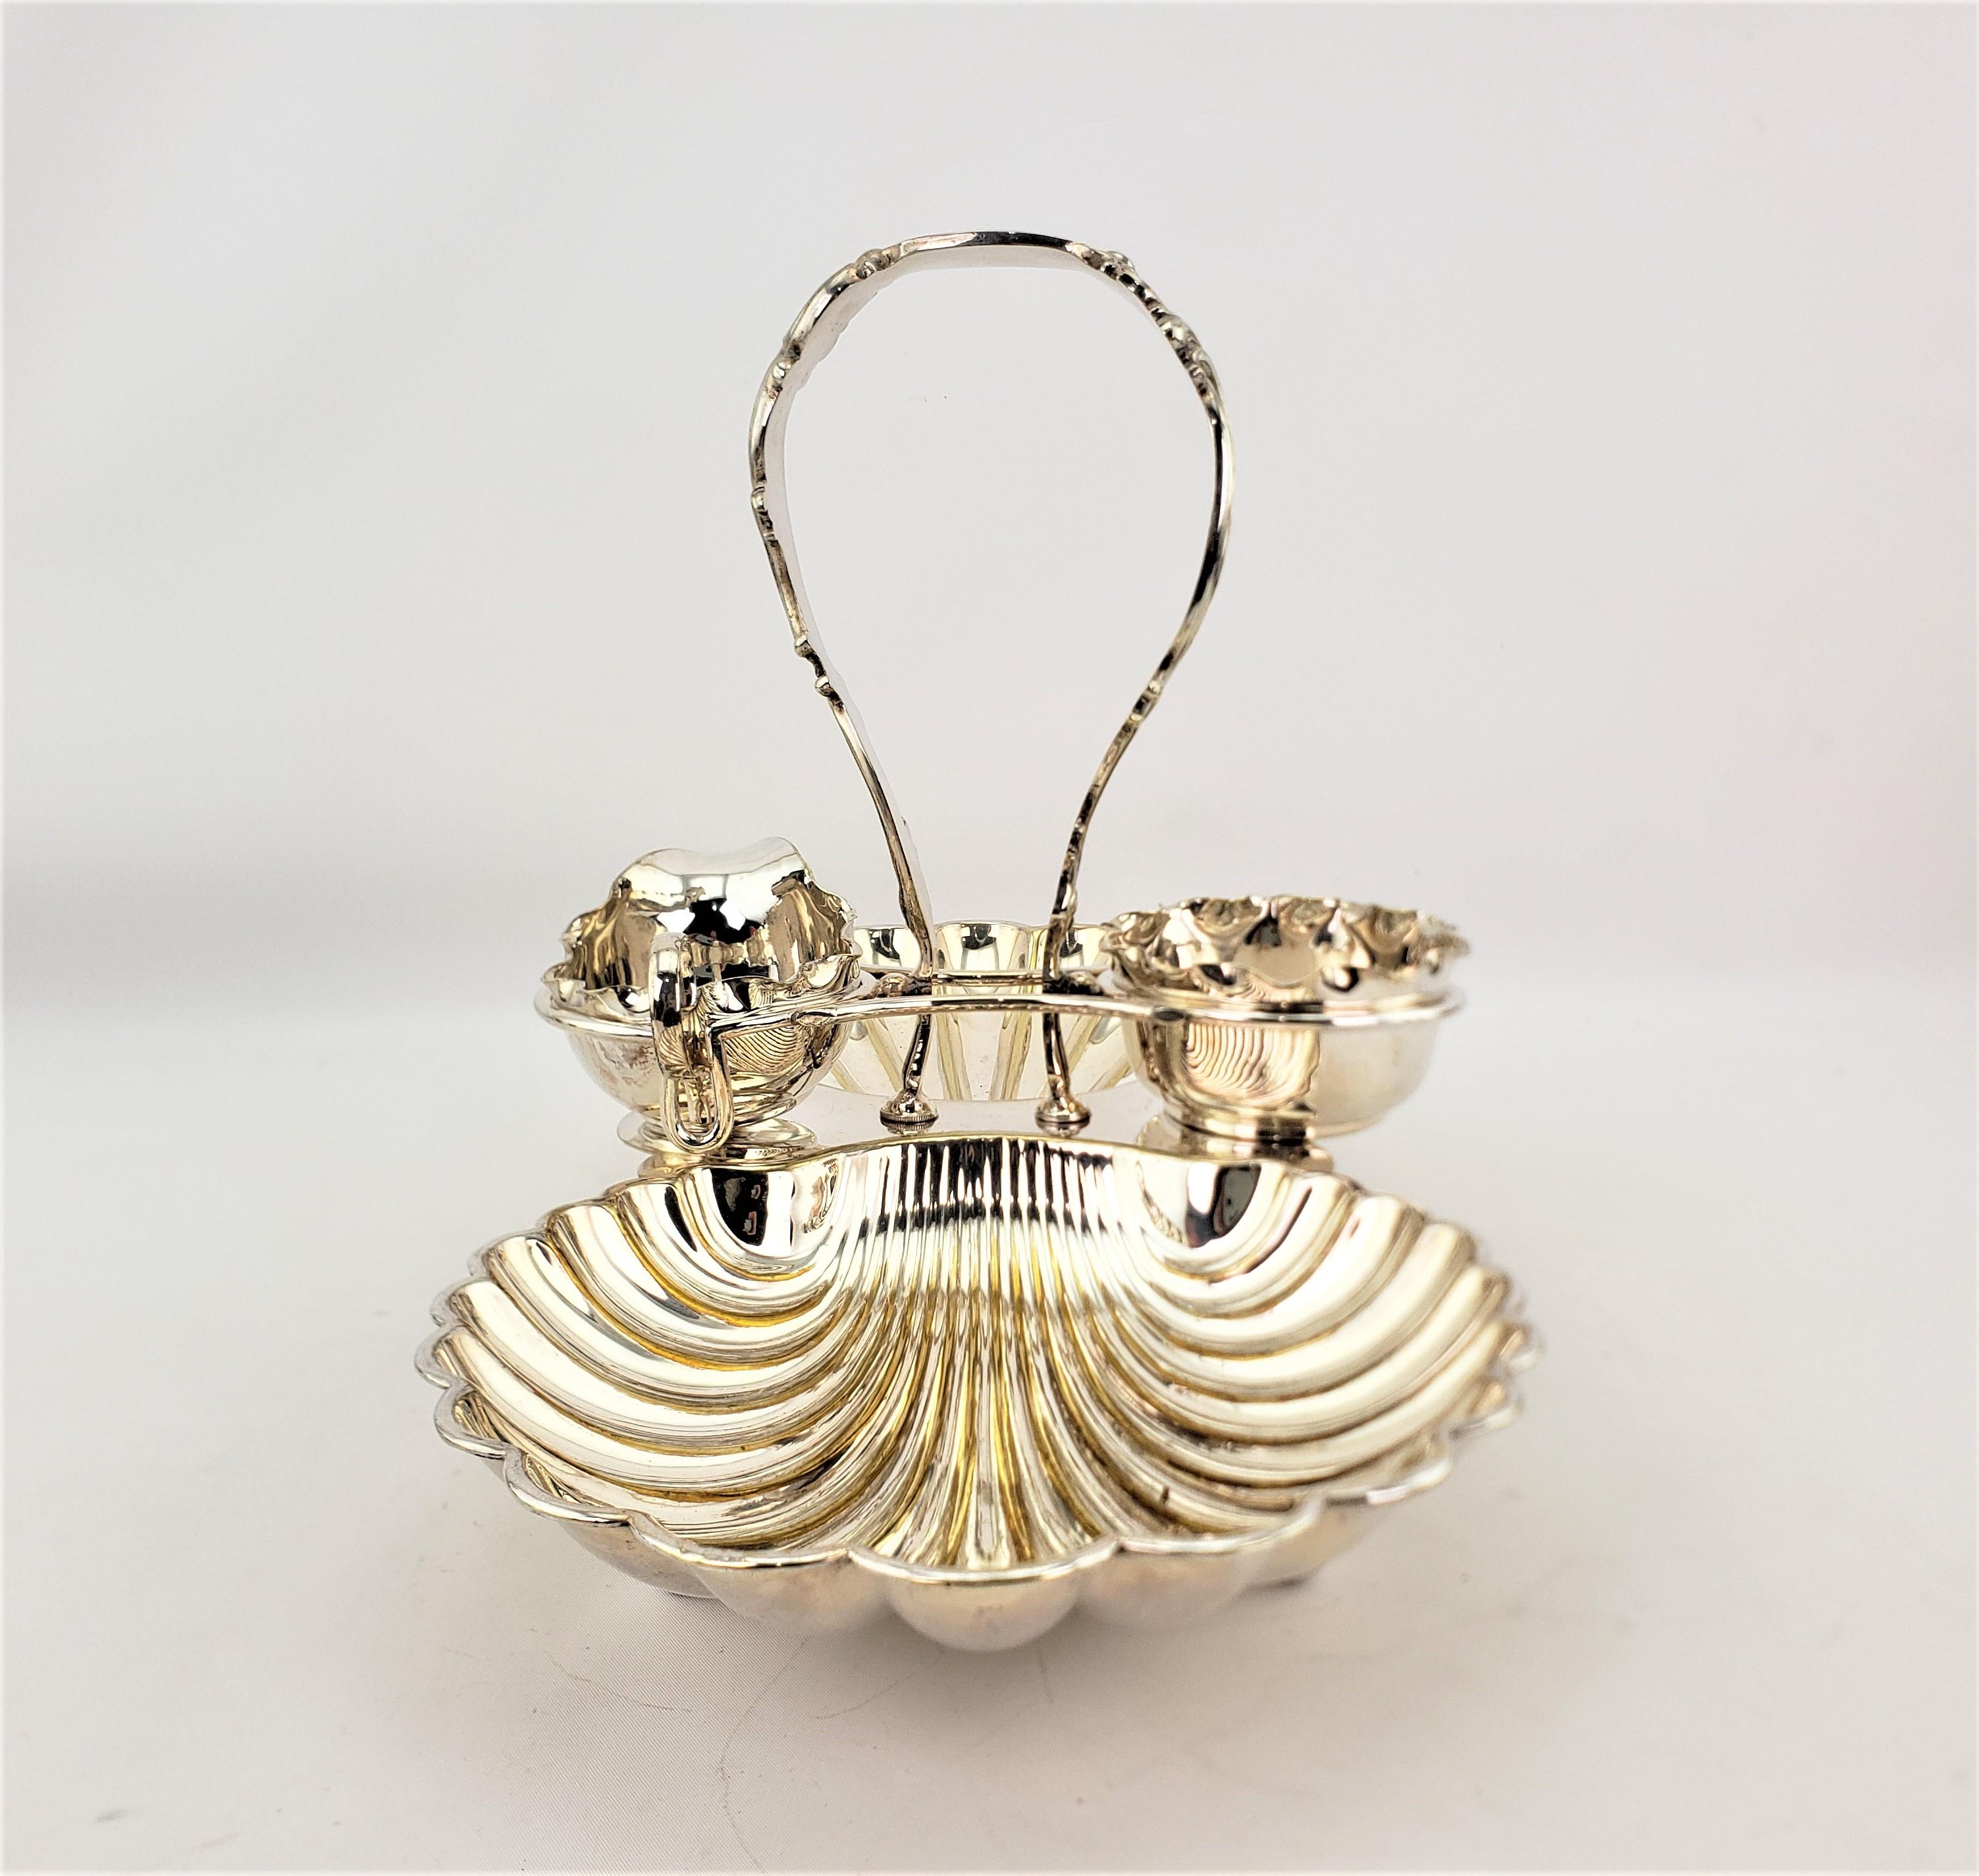 Machine-Made Large Antique Silver Plated R Rugg or Rew English Berry Server with Shell Design For Sale